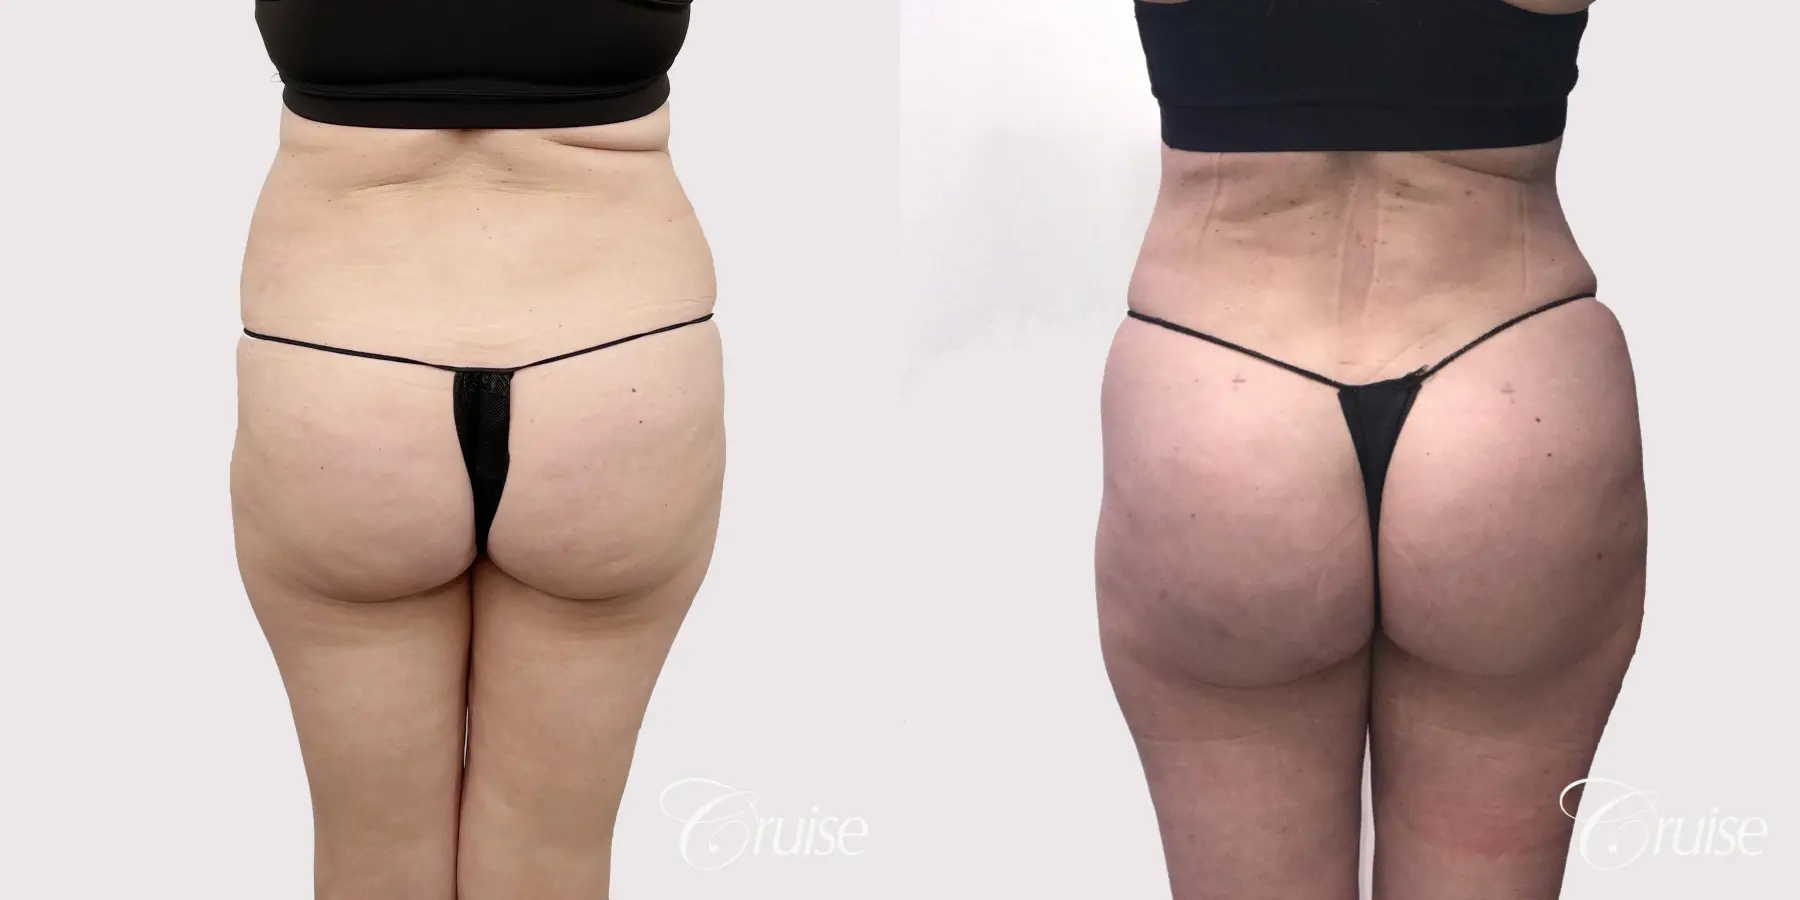 Brazilian Butt Lift: Patient 2 - Before and After 3